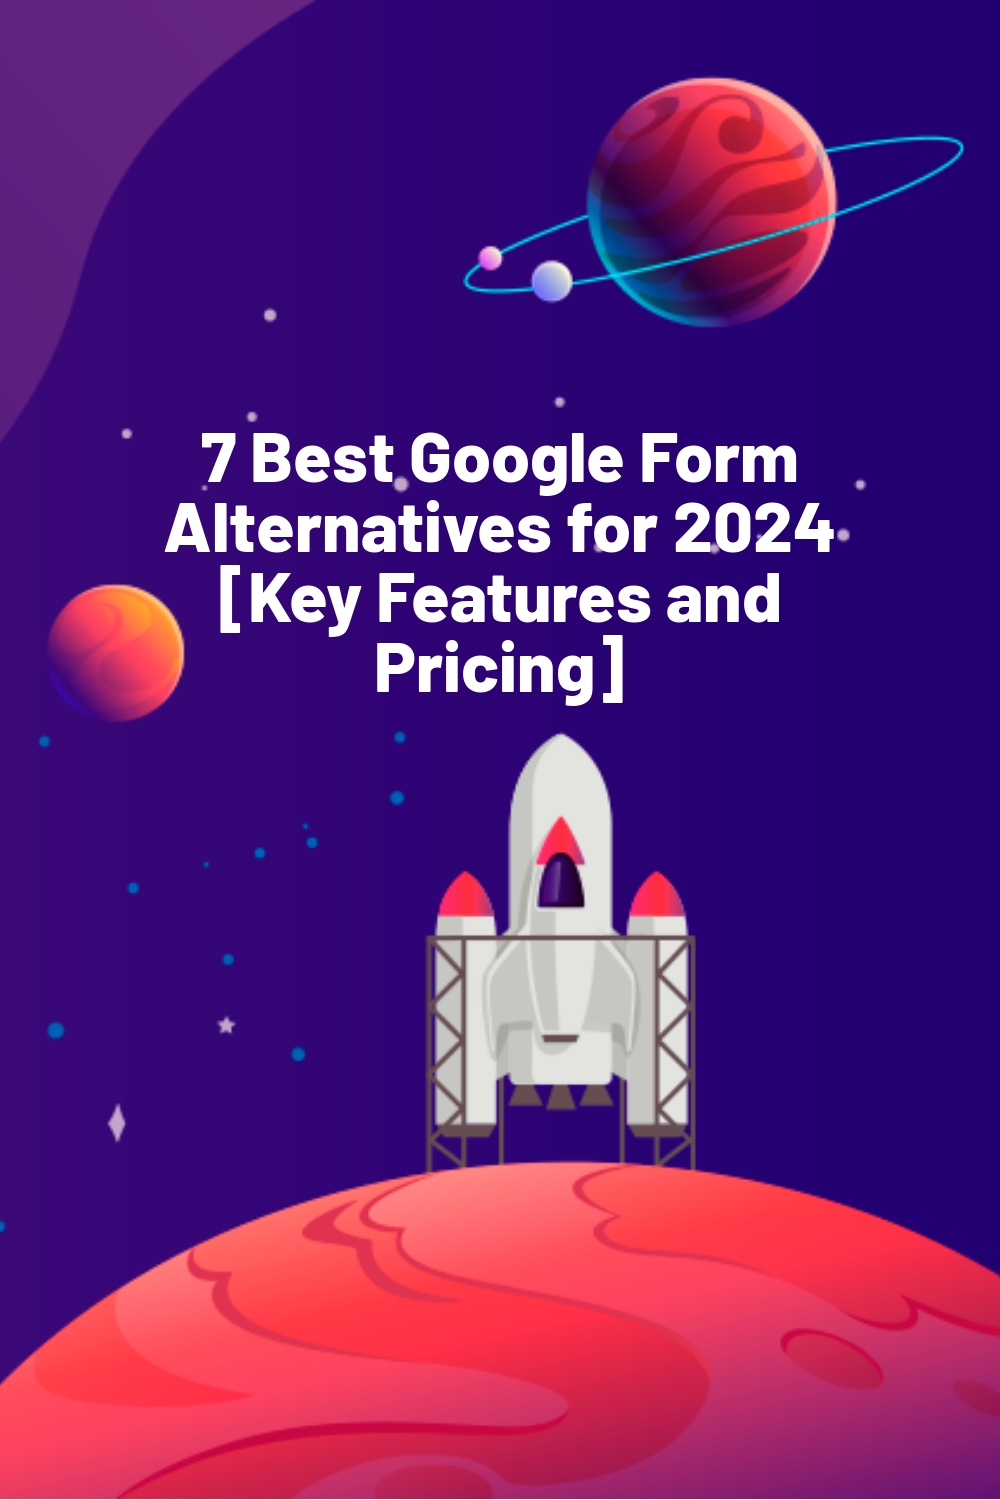 7 Best Google Form Alternatives for 2024 [Key Features and Pricing]